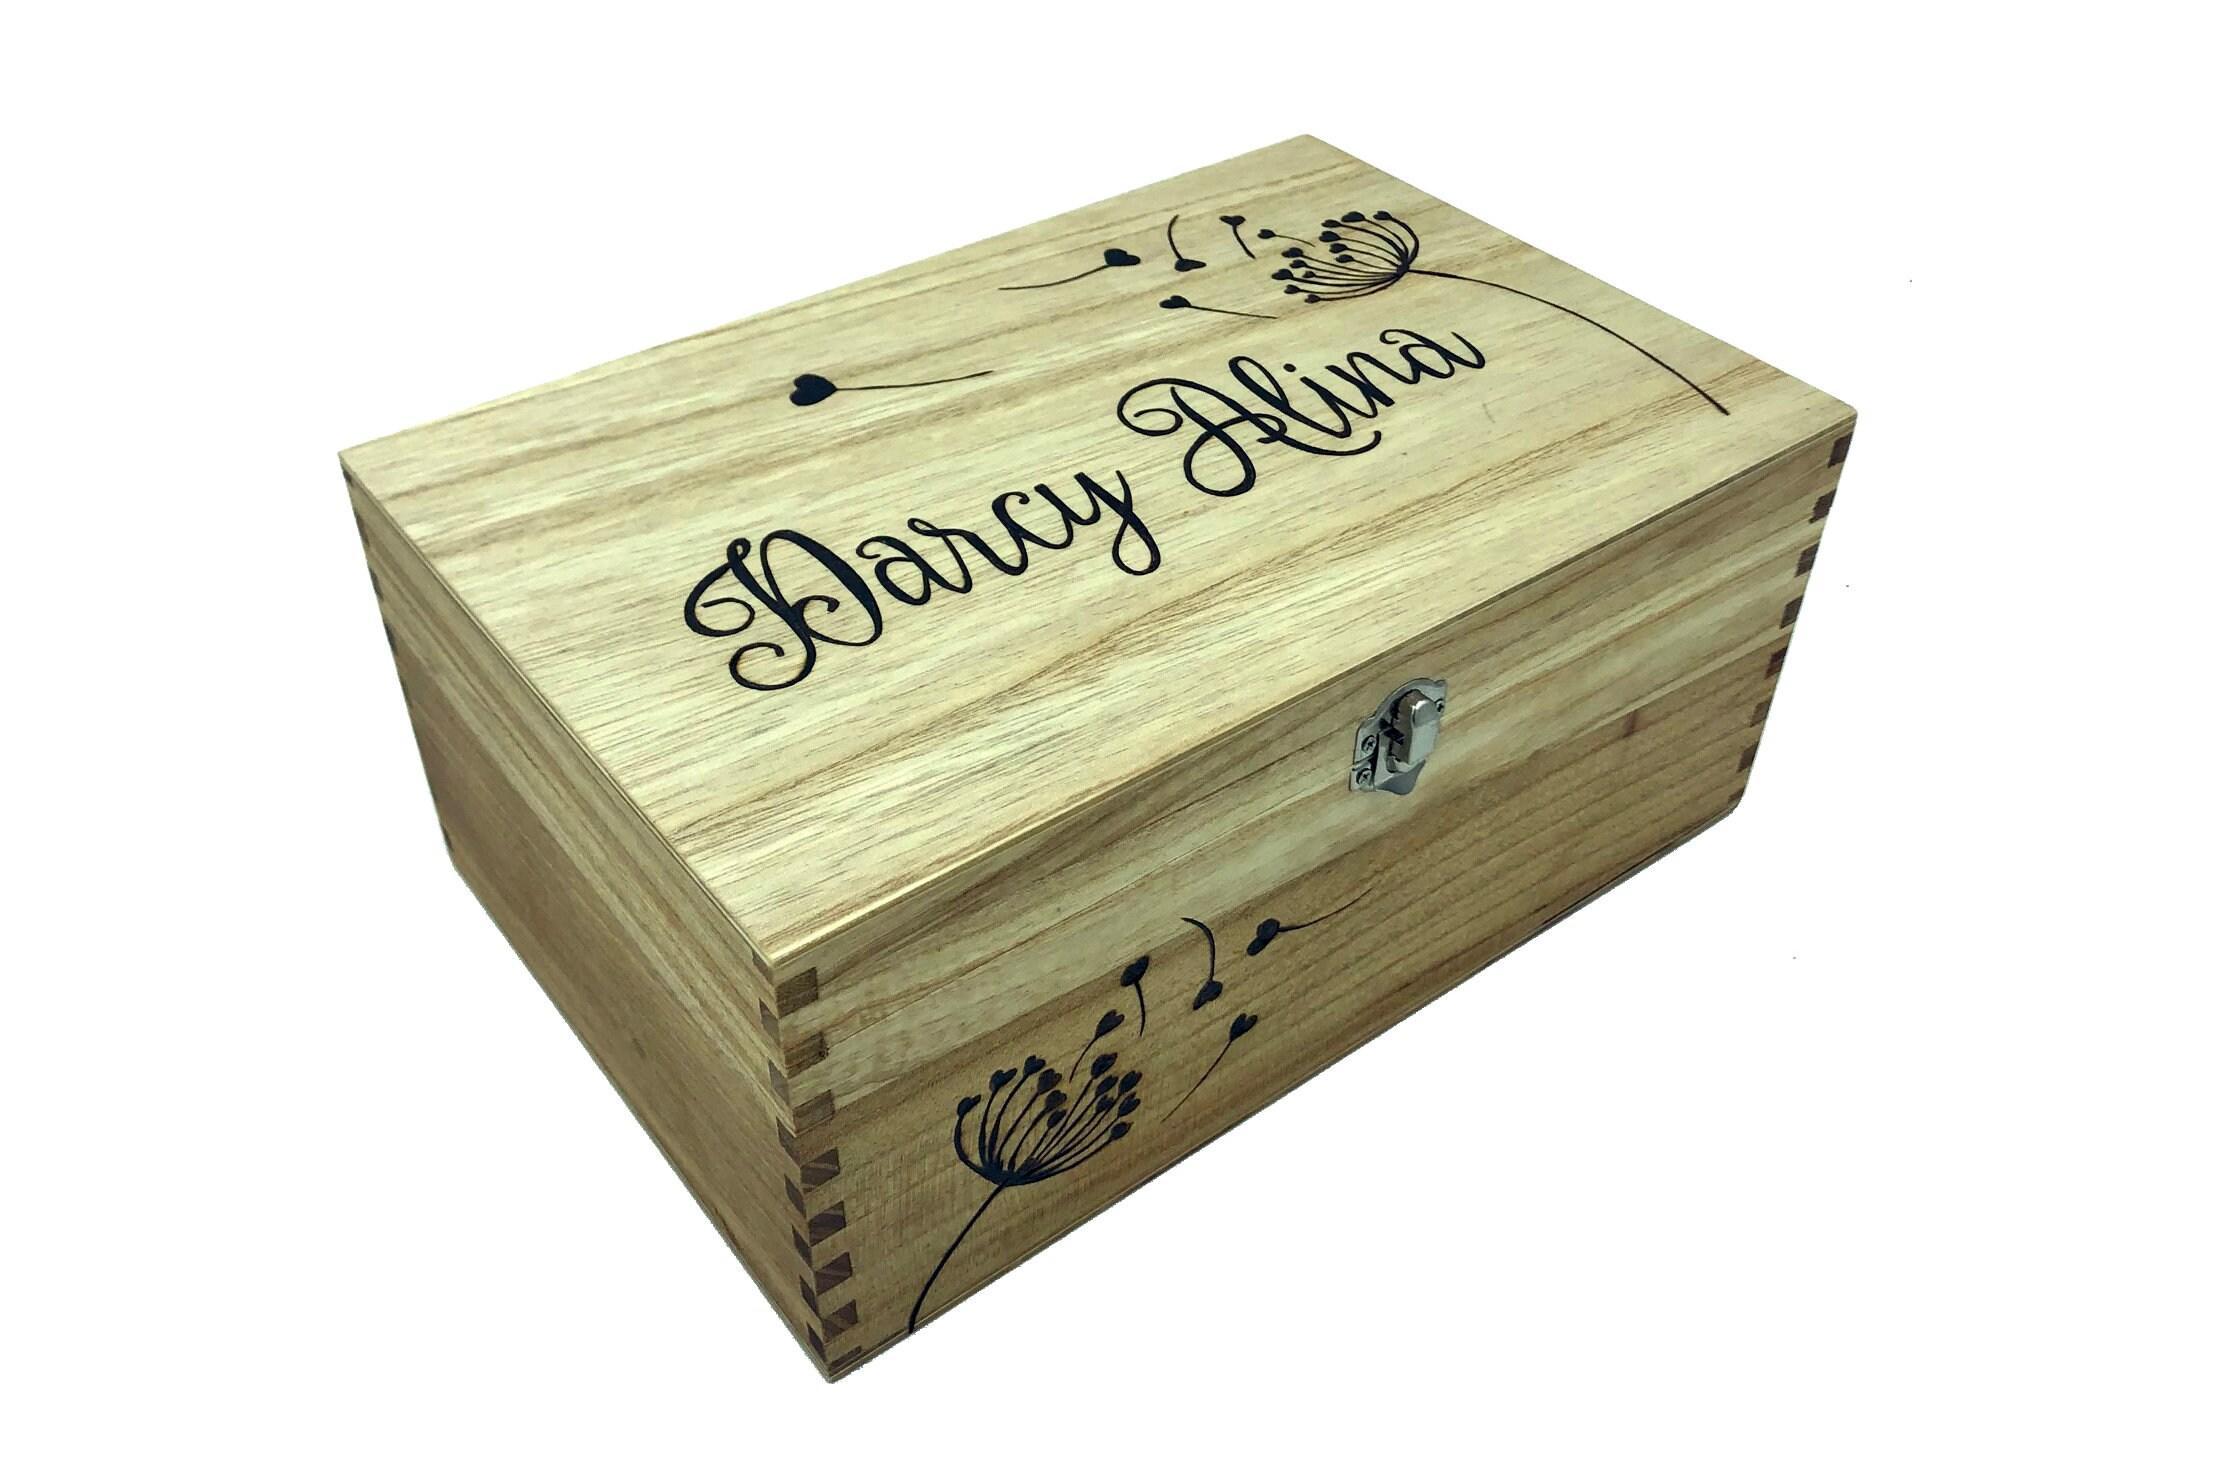 christening box with two names